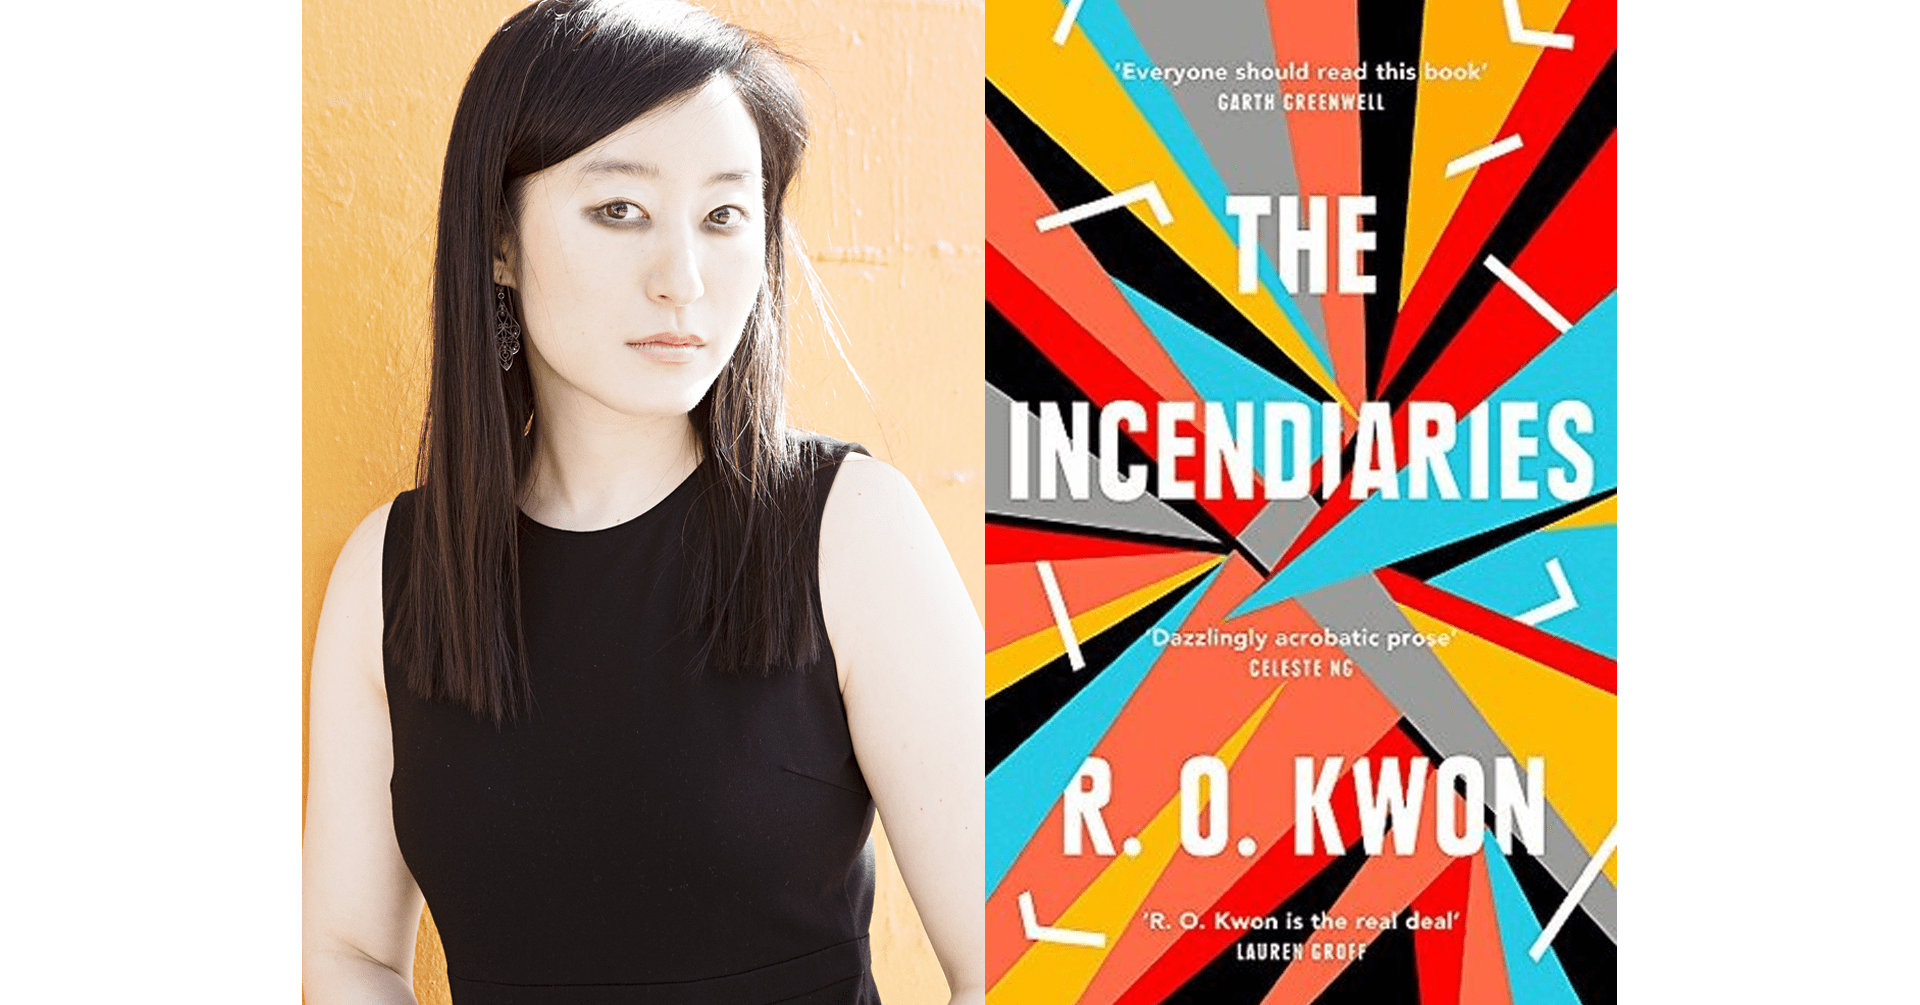 R.O. Kwon author photo & Book Cover "The Incendiaries" by R.O. Kwon